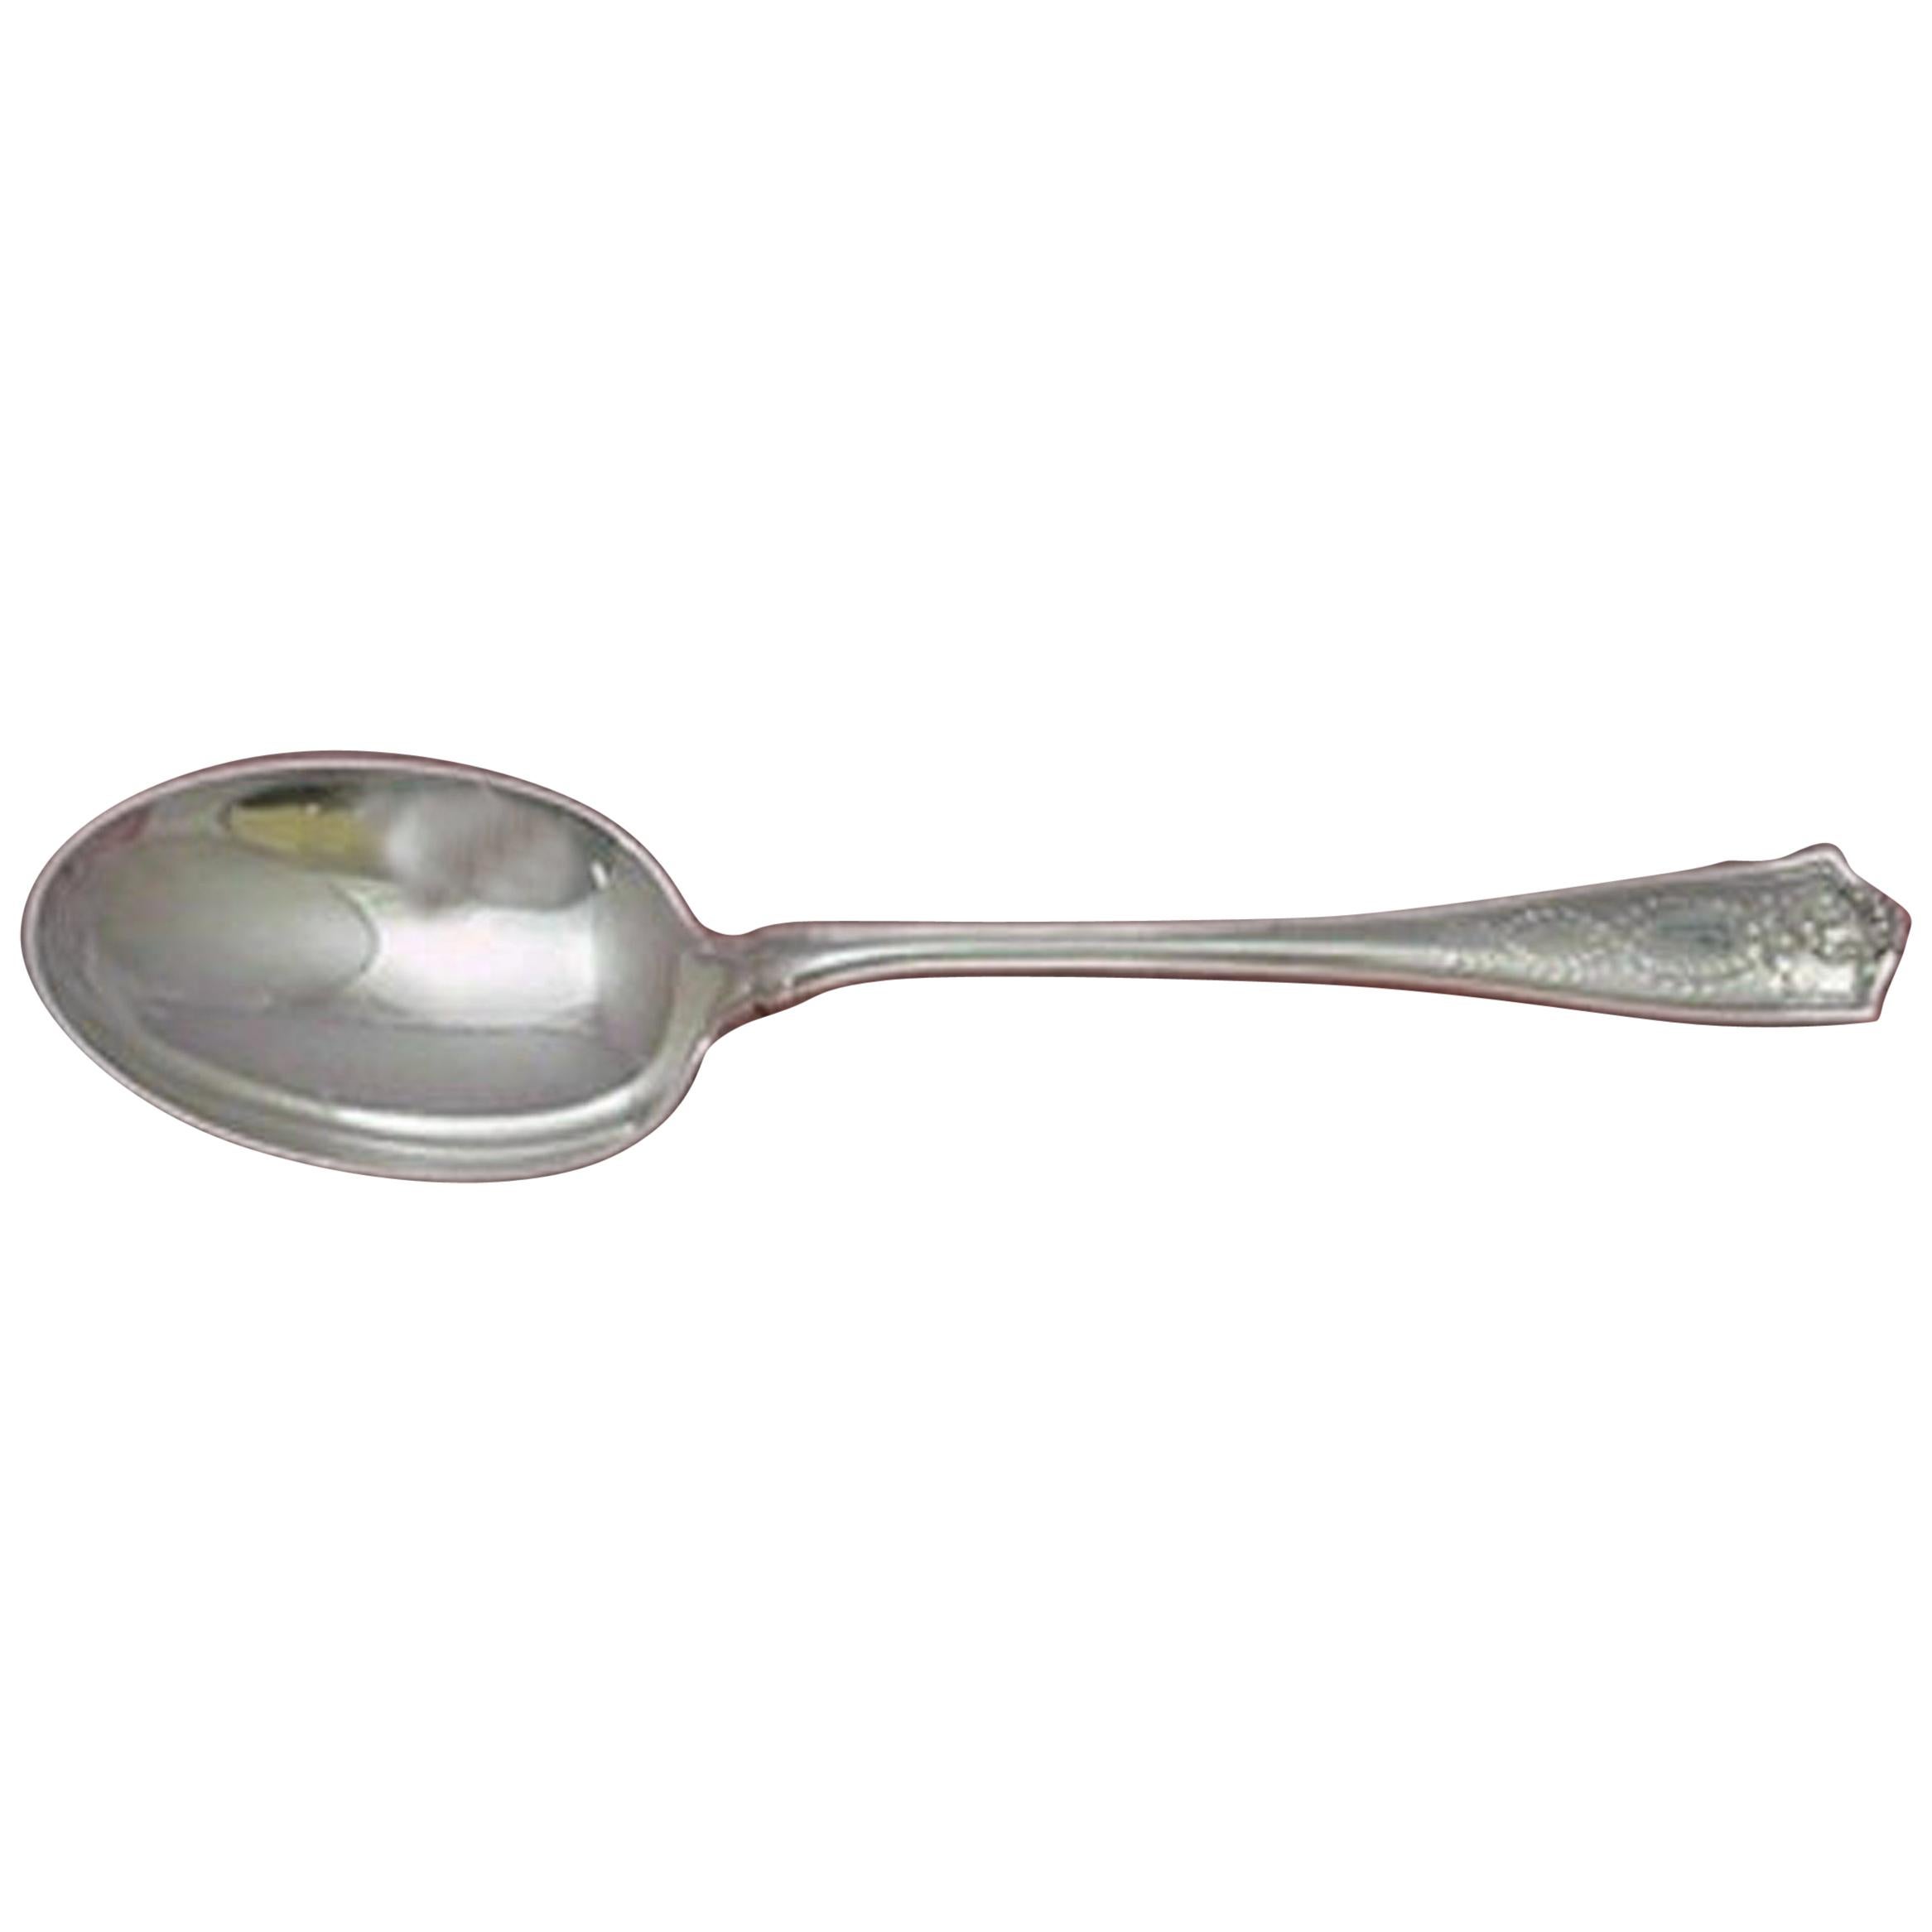 Winthrop by Tiffany & Co Sterling Silver Vegetable Serving Spoon